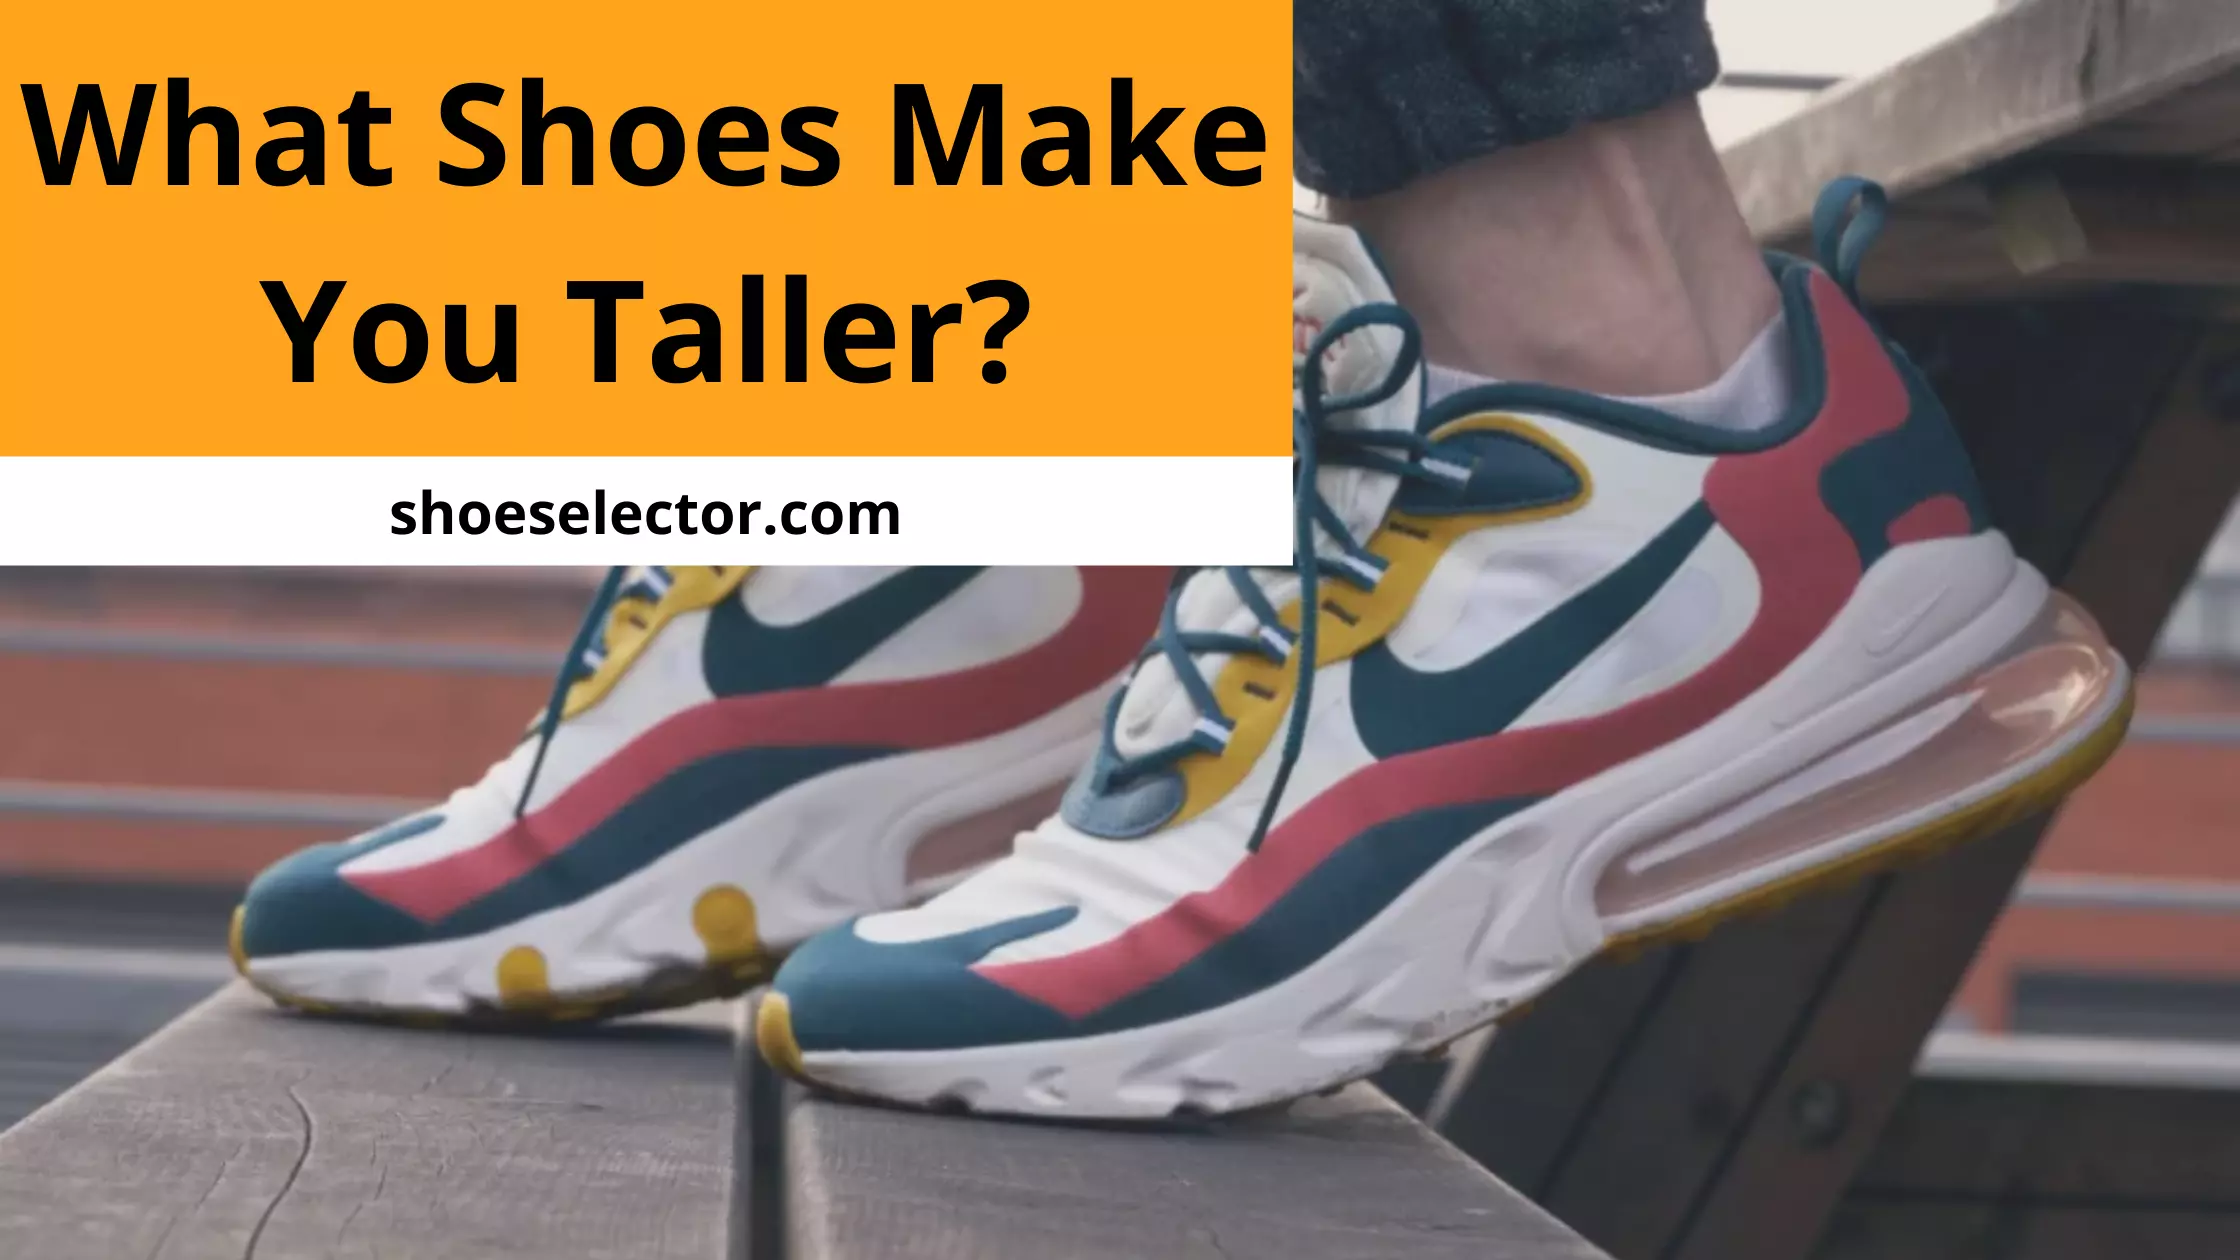 What Shoes Make You Taller? 5 Simple Steps